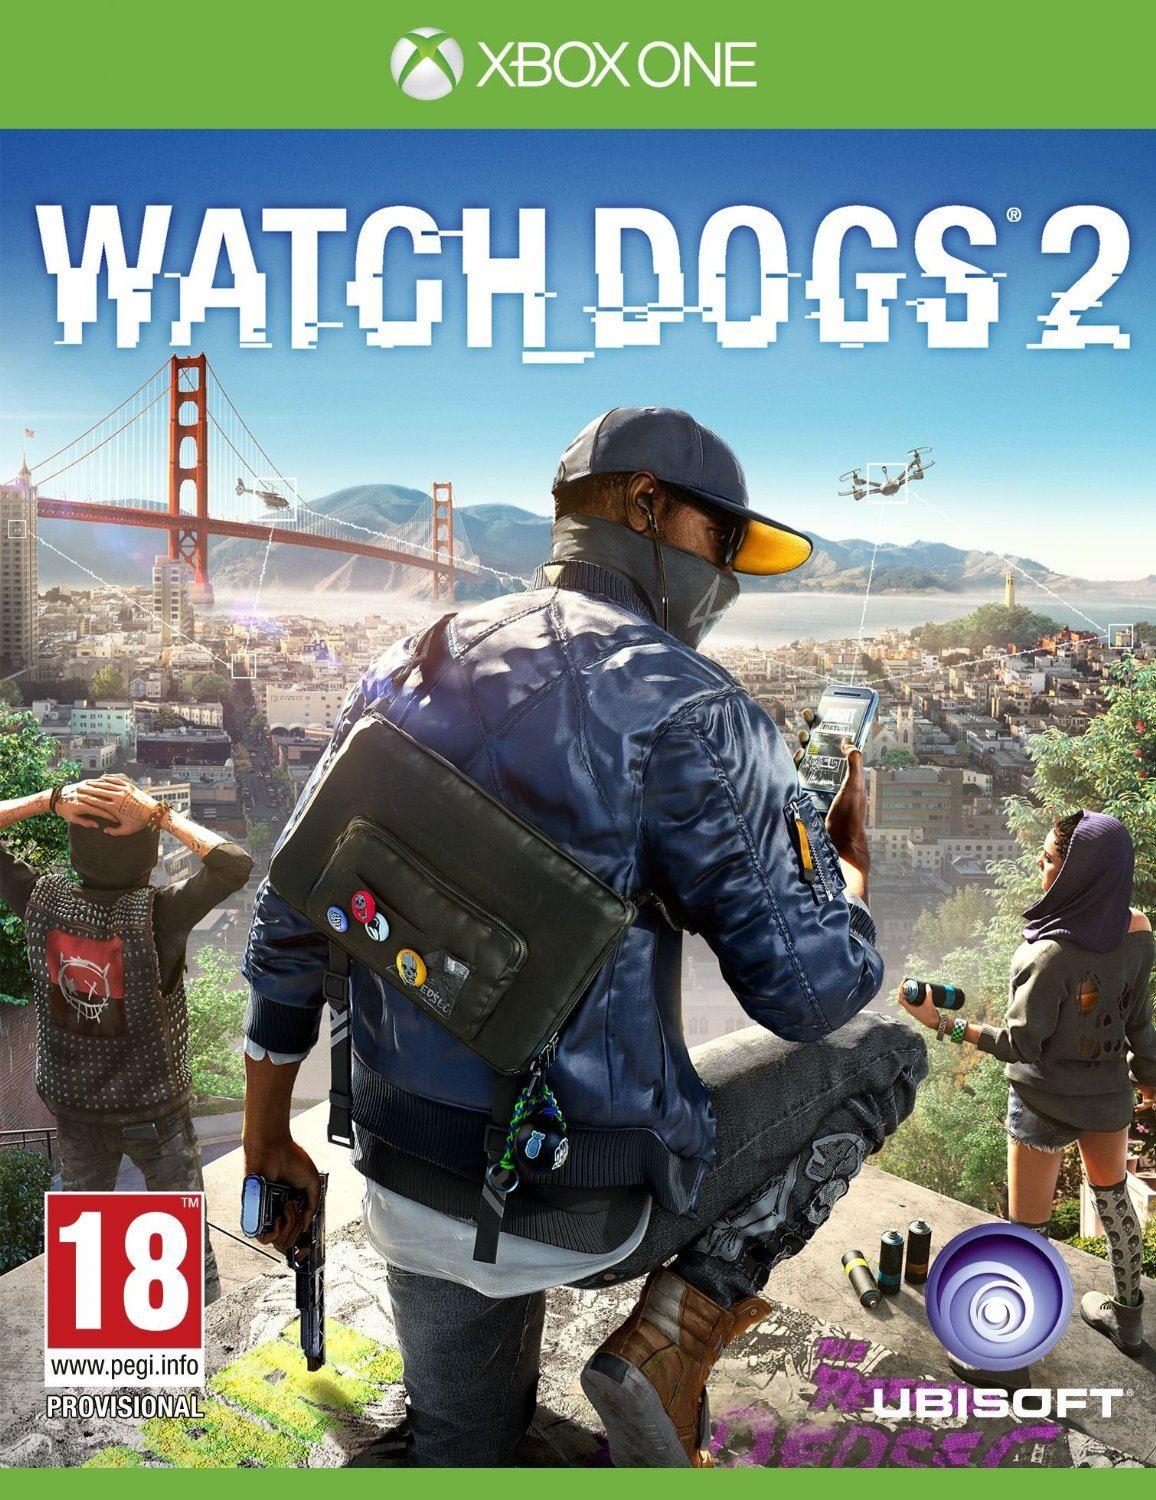 xbox 1 watch dogs 2 download